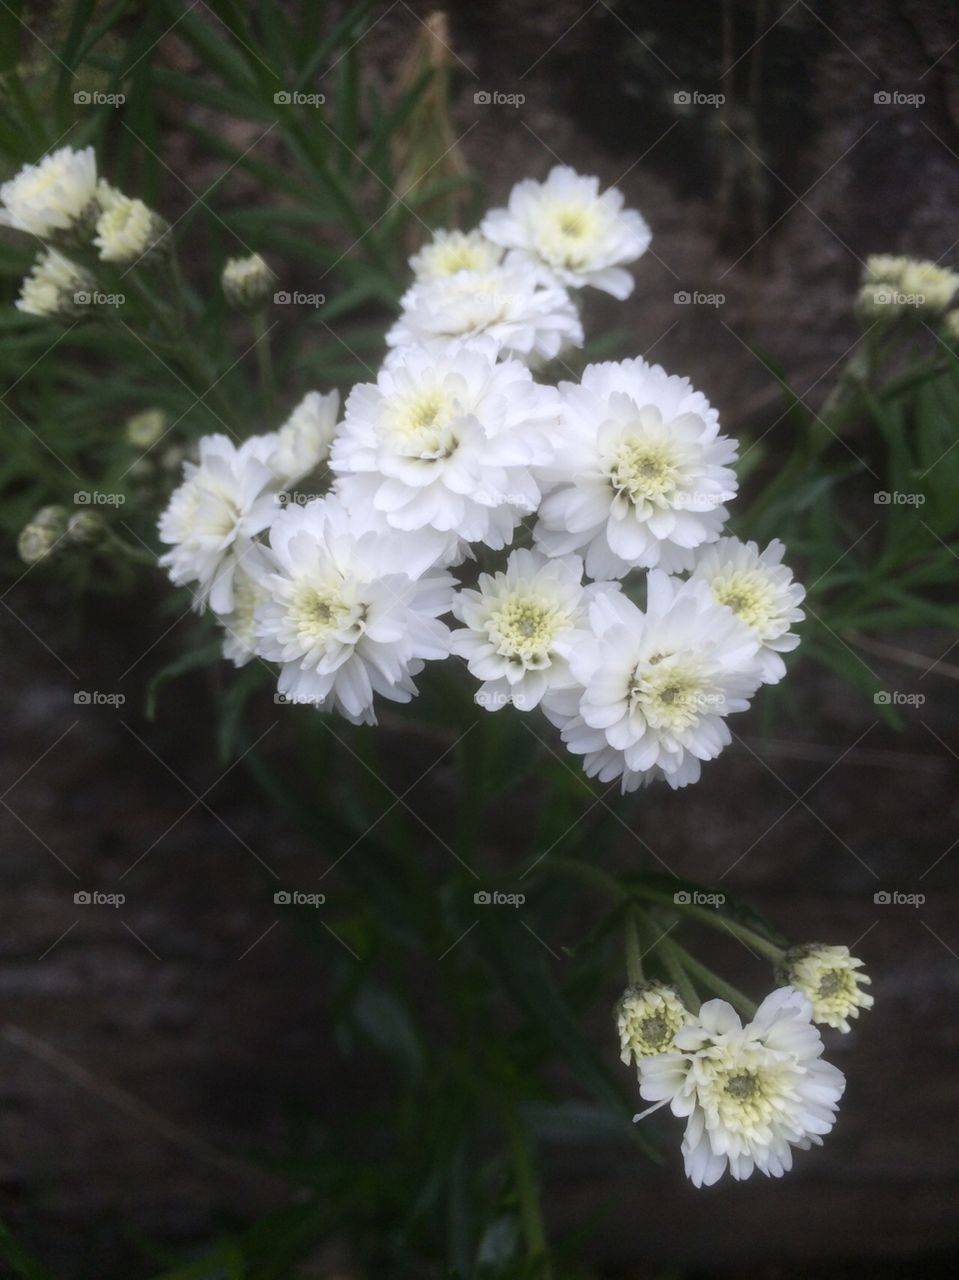 Beautiful small delicate white flowers in this variety of perennial achillea 